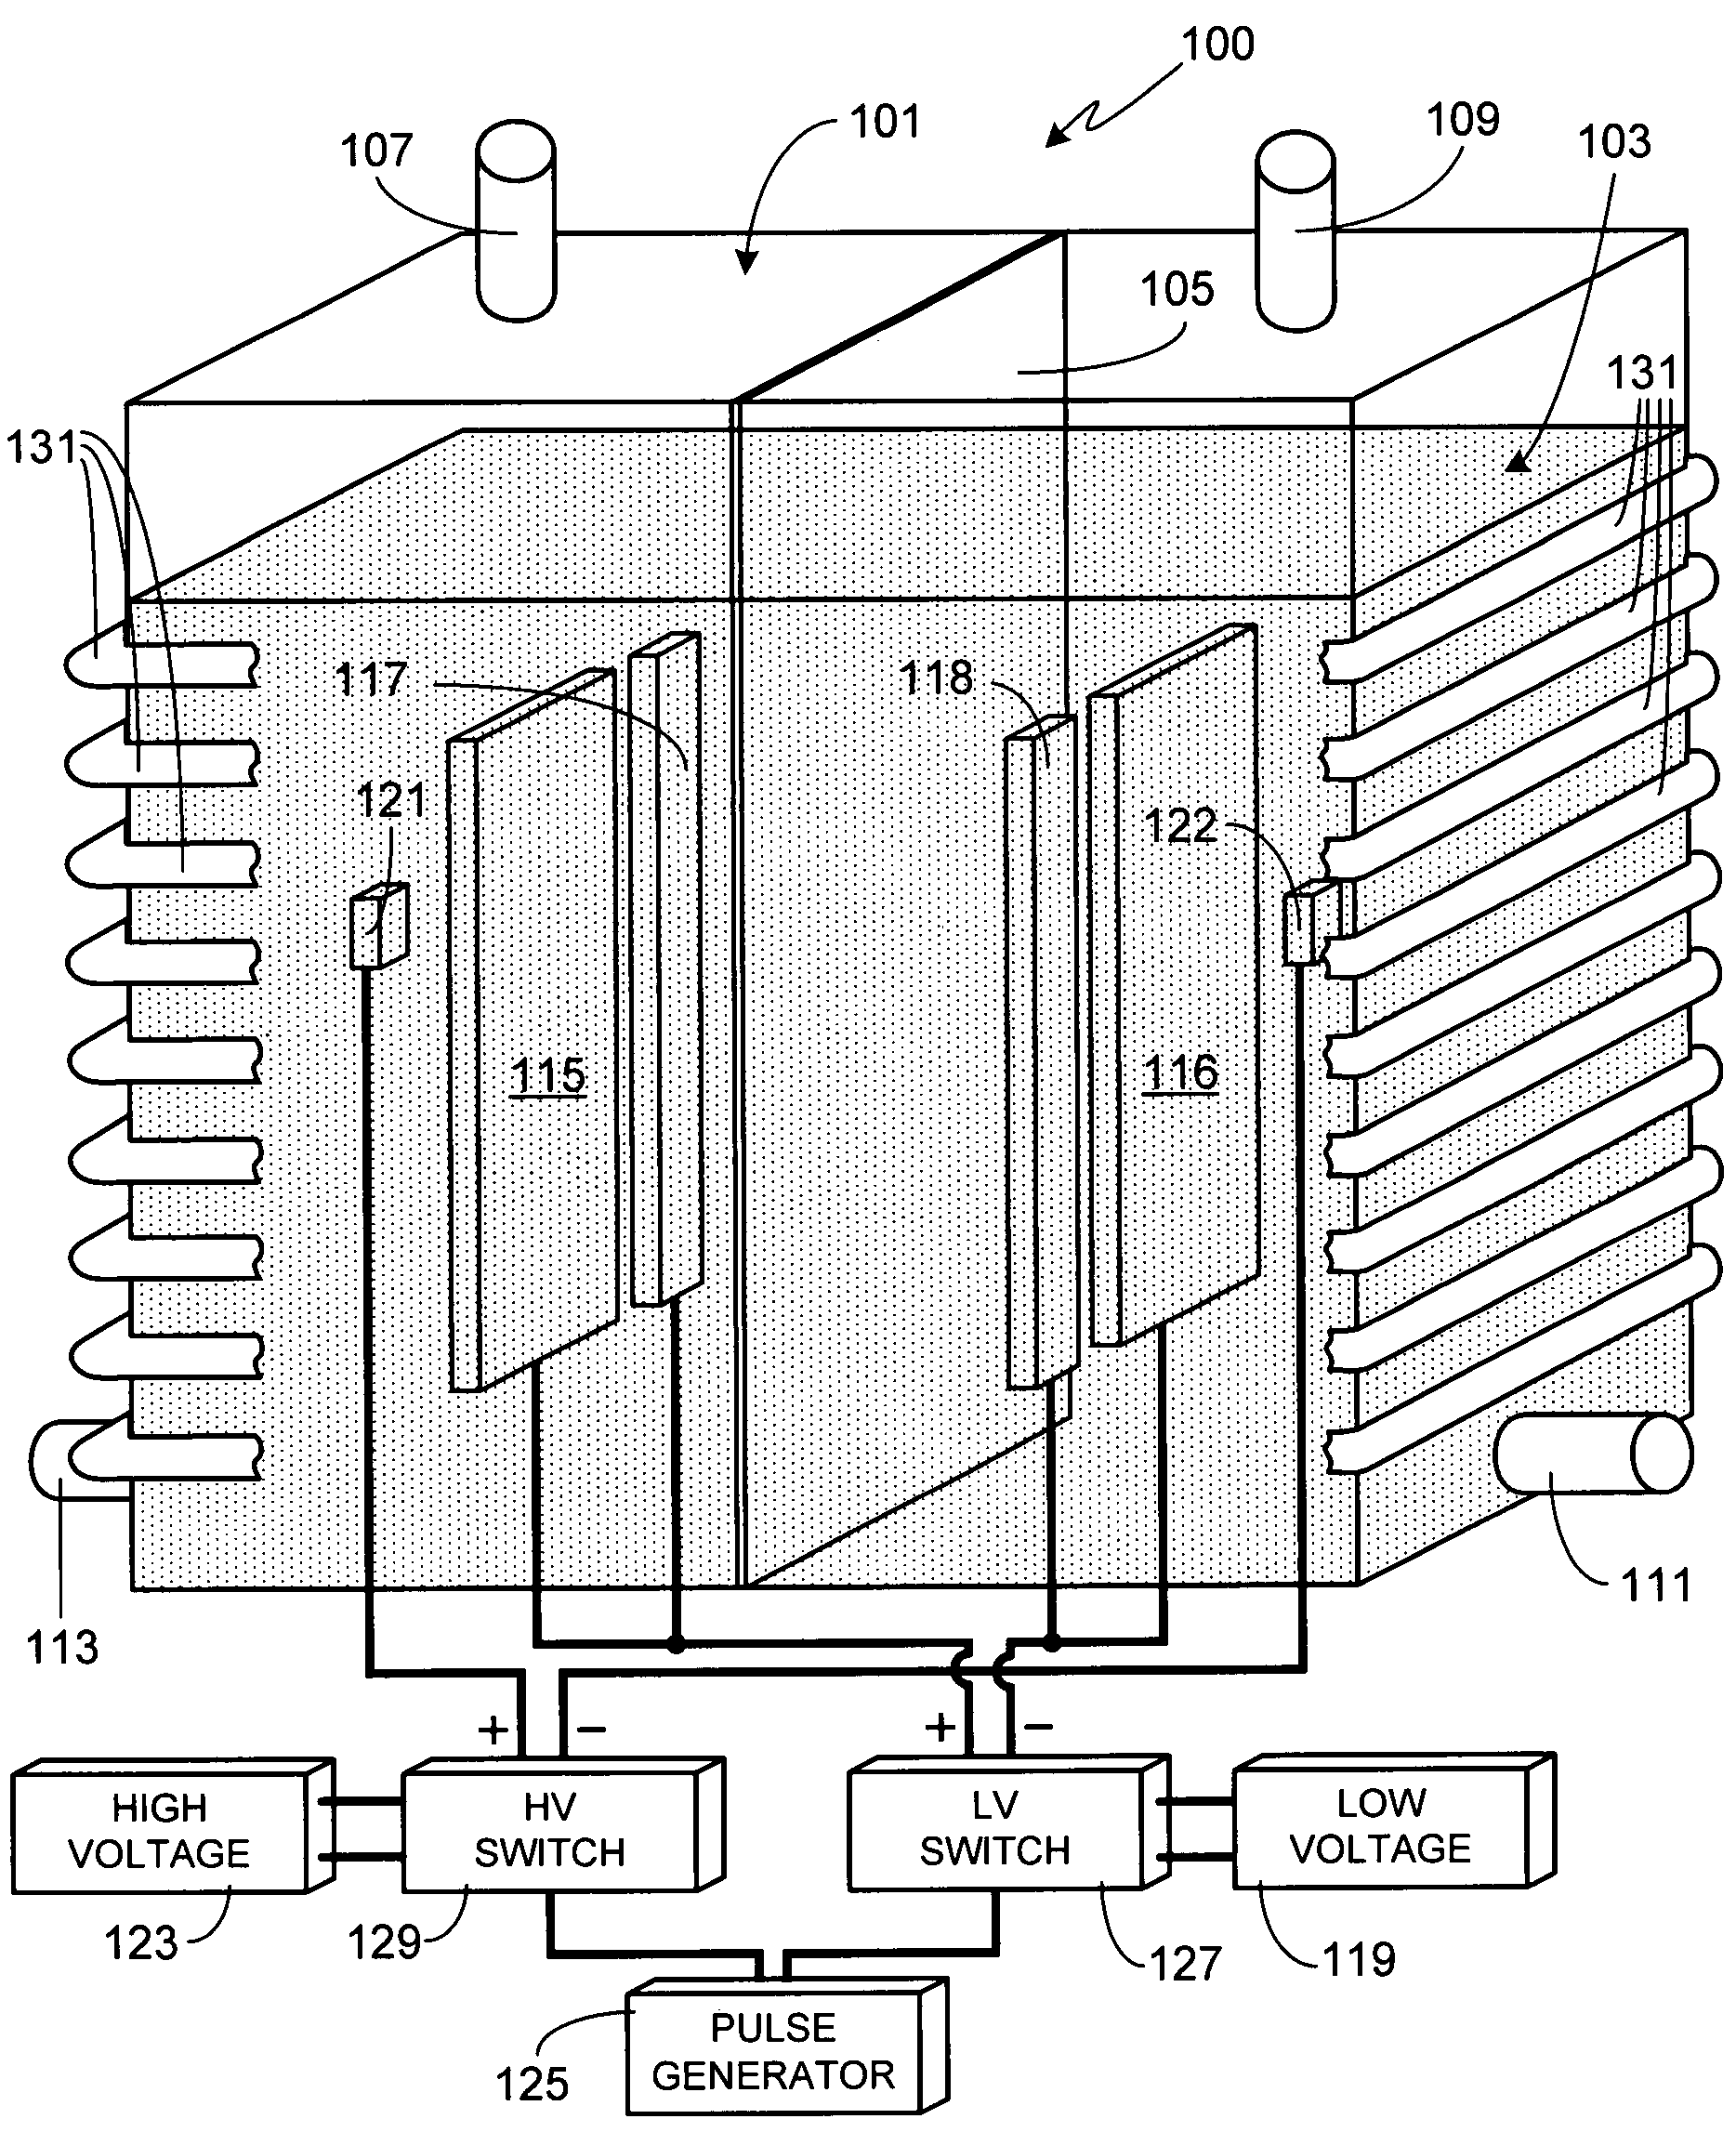 Method of using an electrolysis apparatus with a pulsed, dual voltage, multi-composition electrode assembly